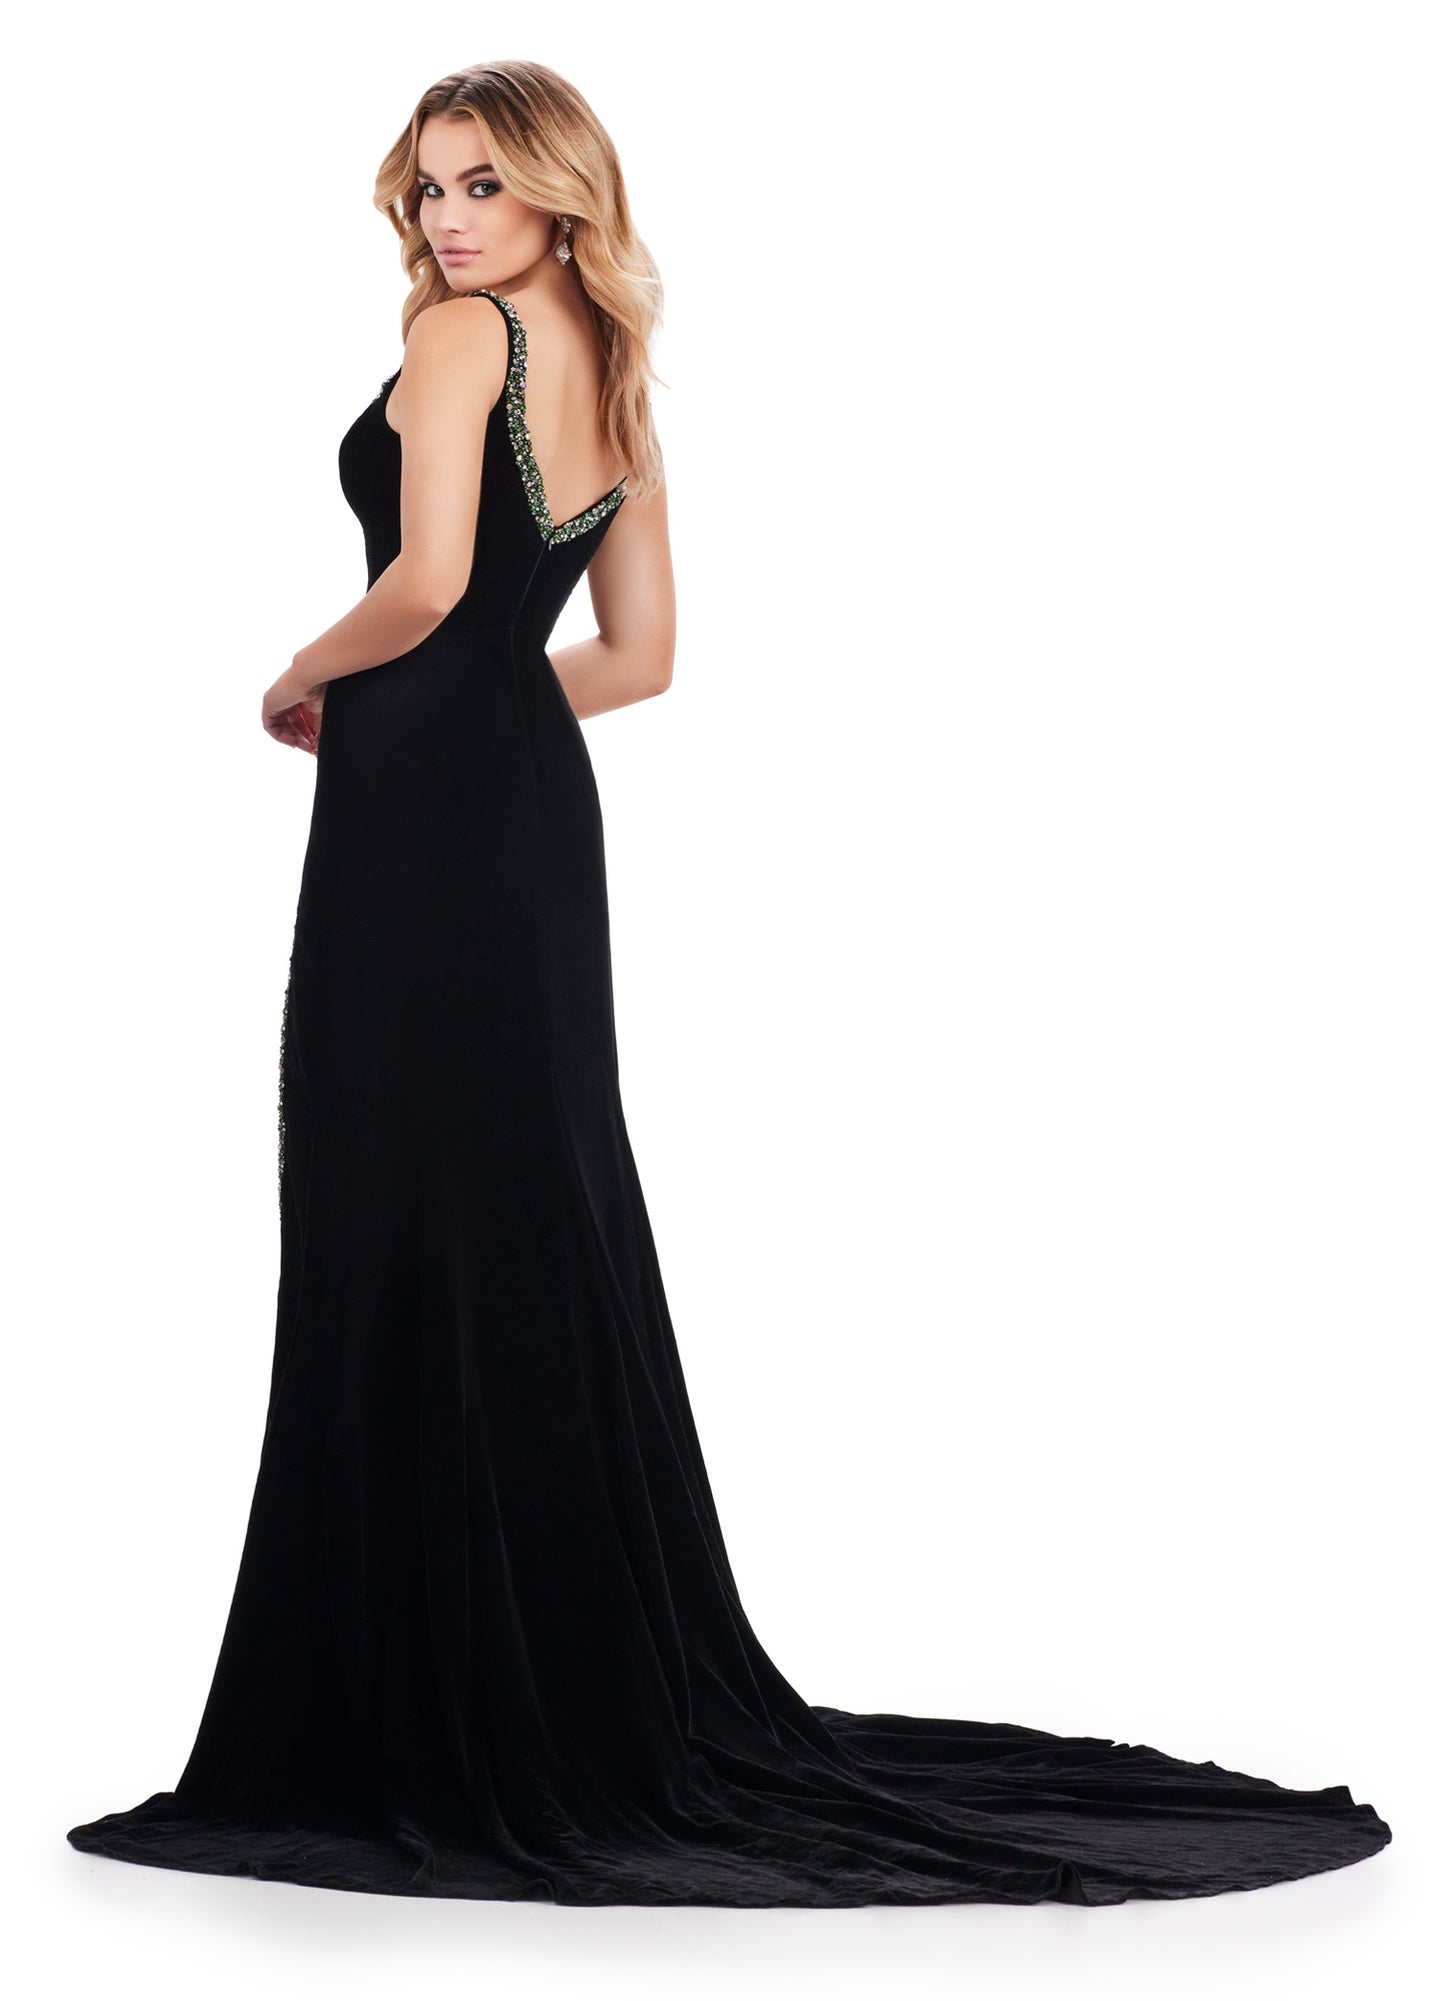 Elevate your formal look with the Ashley Lauren 11653 Long Prom Dress. This elegant velvet gown features a v-neckline and intricate beaded details, adding a touch of glamour to your ensemble. The slit adds a modern touch, while the pageant-worthy design makes this dress perfect for any special occasion. Regal and fabulous. This V-neck velvet gown features beadwork that trims the neckline. The look is complete with a left leg slit.